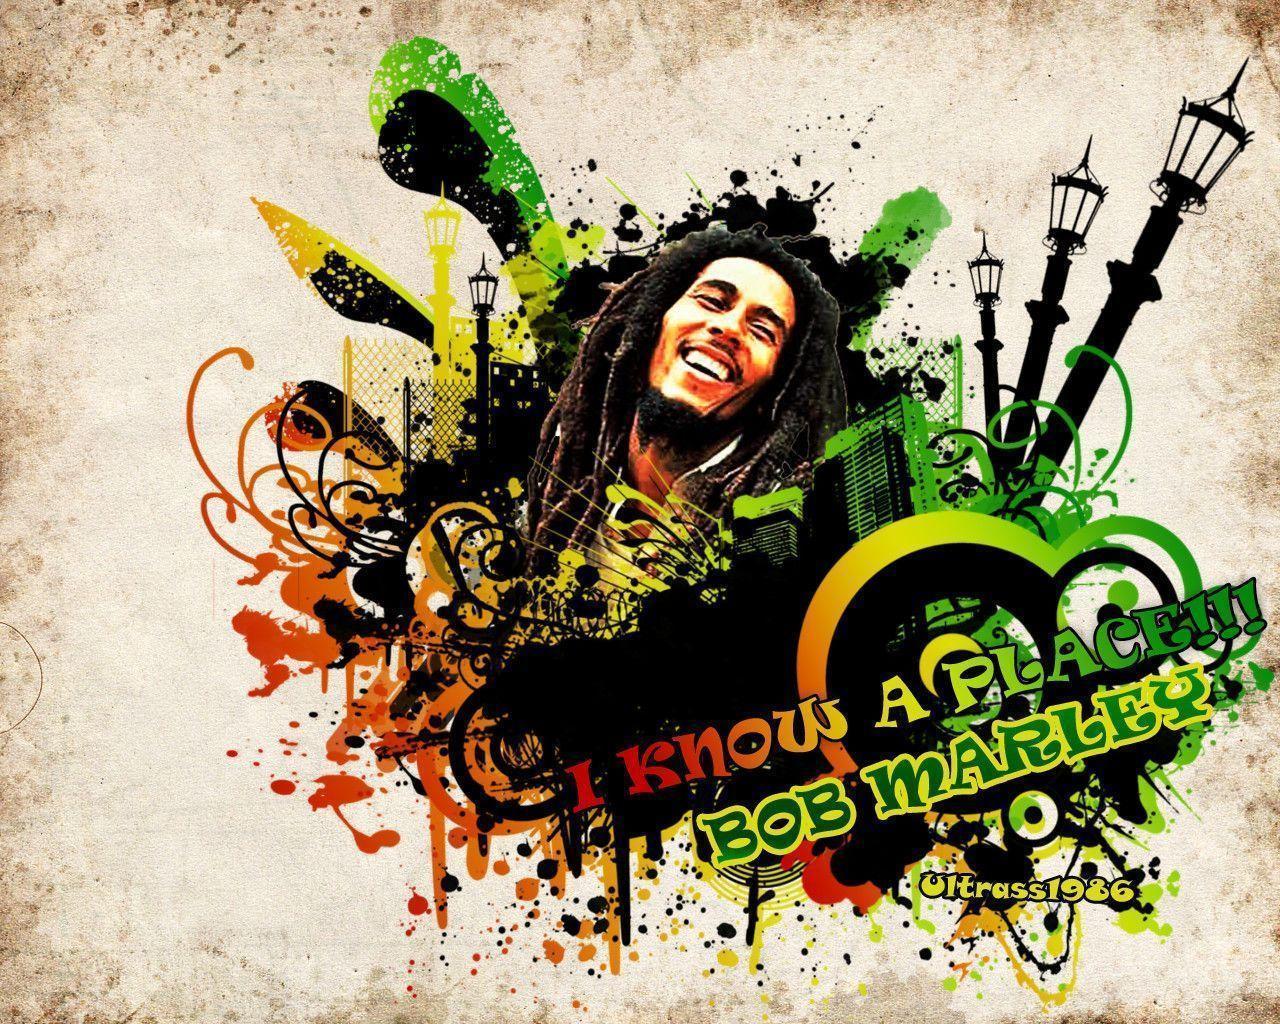 Bob Marley Wallpaper Images Is Cool Wallpapers  Цитаты боба марли Боб  марли Боб